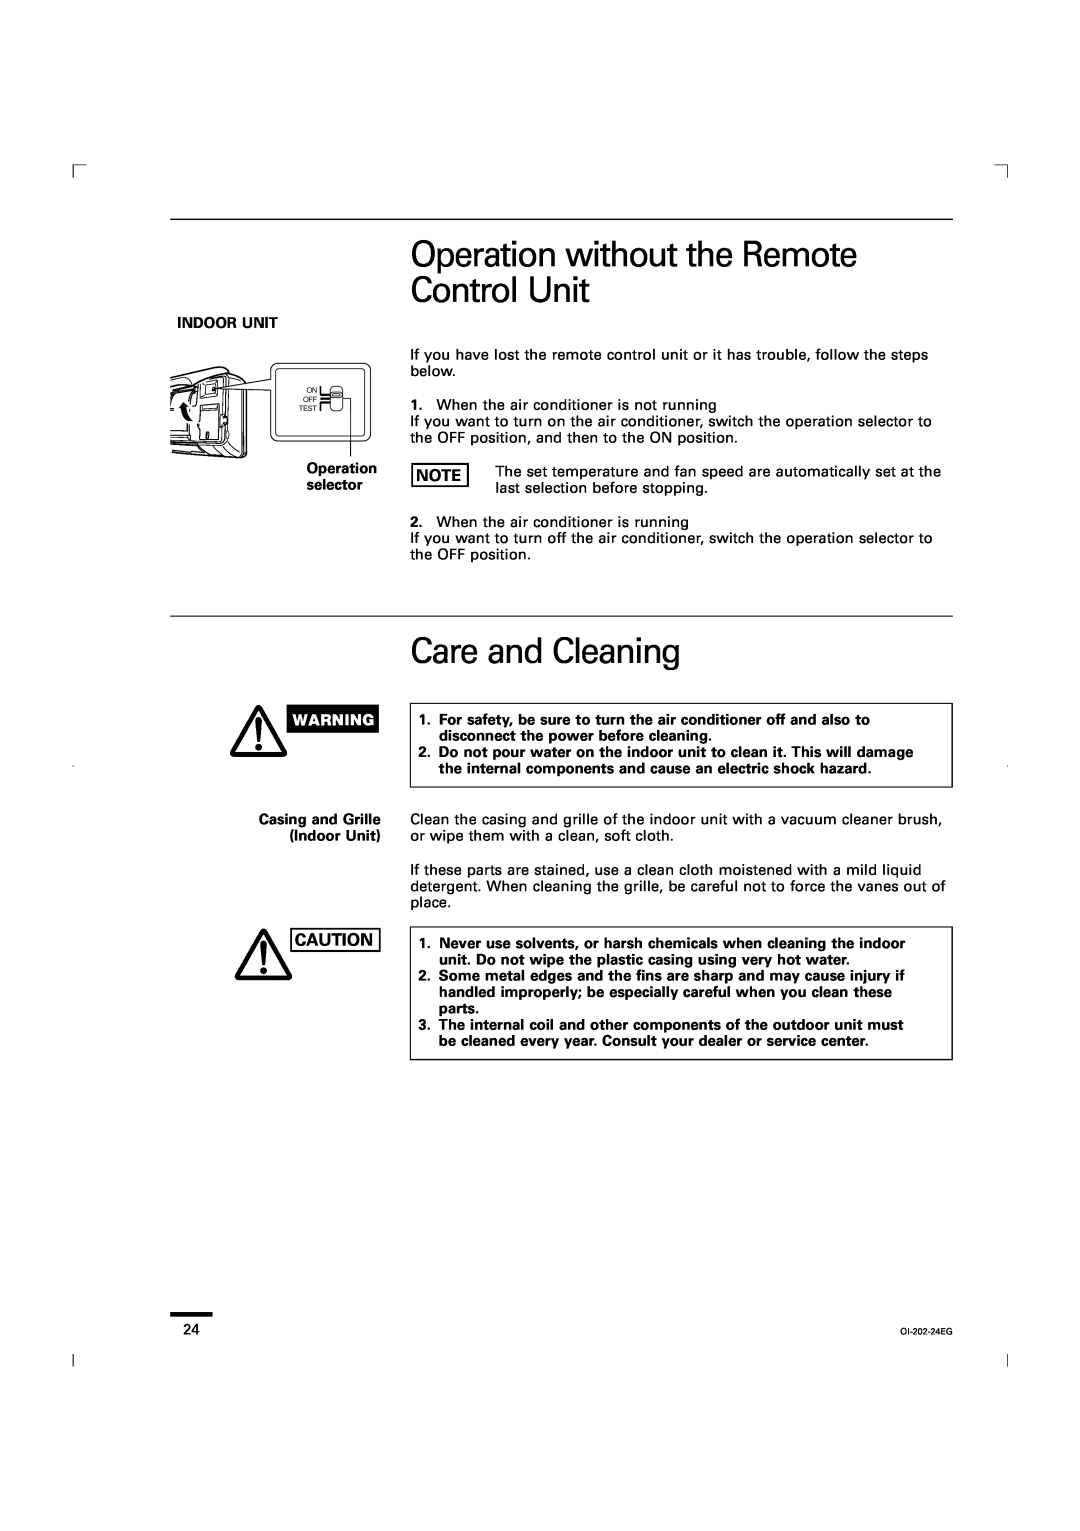 Sanyo CG1411, KGS1411 service manual Operation without the Remote Control Unit, Care and Cleaning 